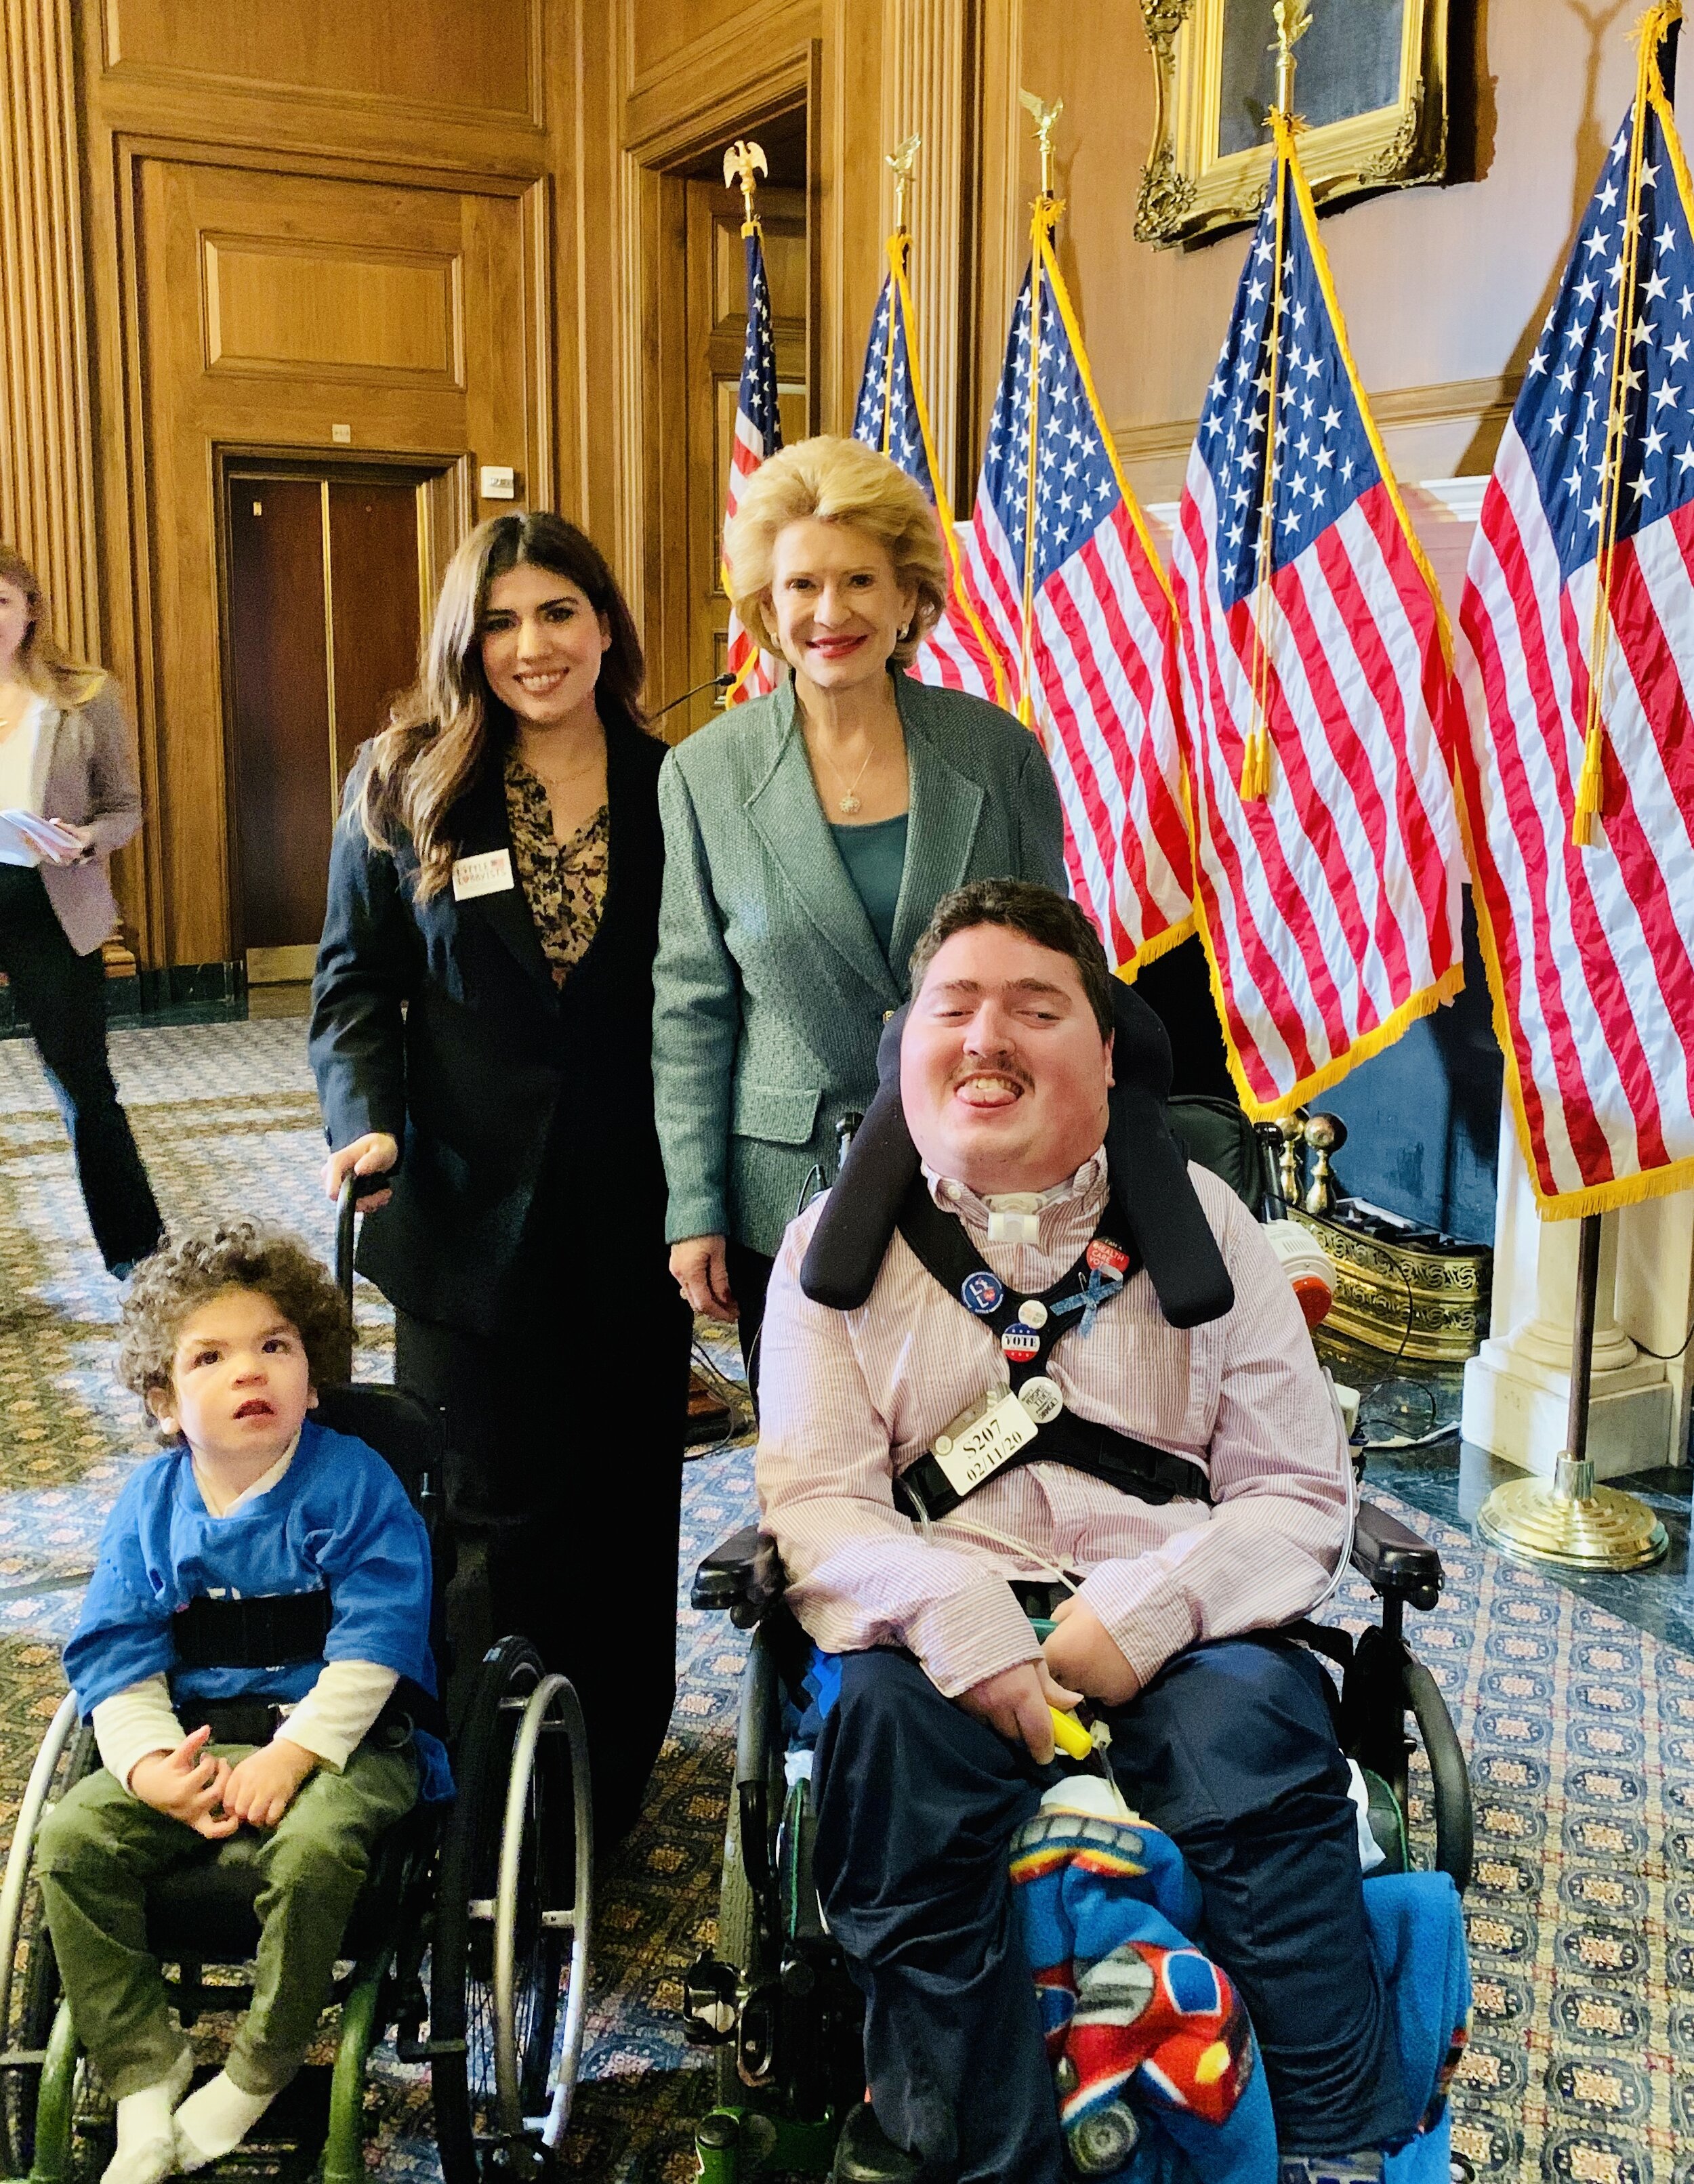  Little Lobbyists members pose with a U.S. Senator after a press conference, with U.S. flags in the background. 